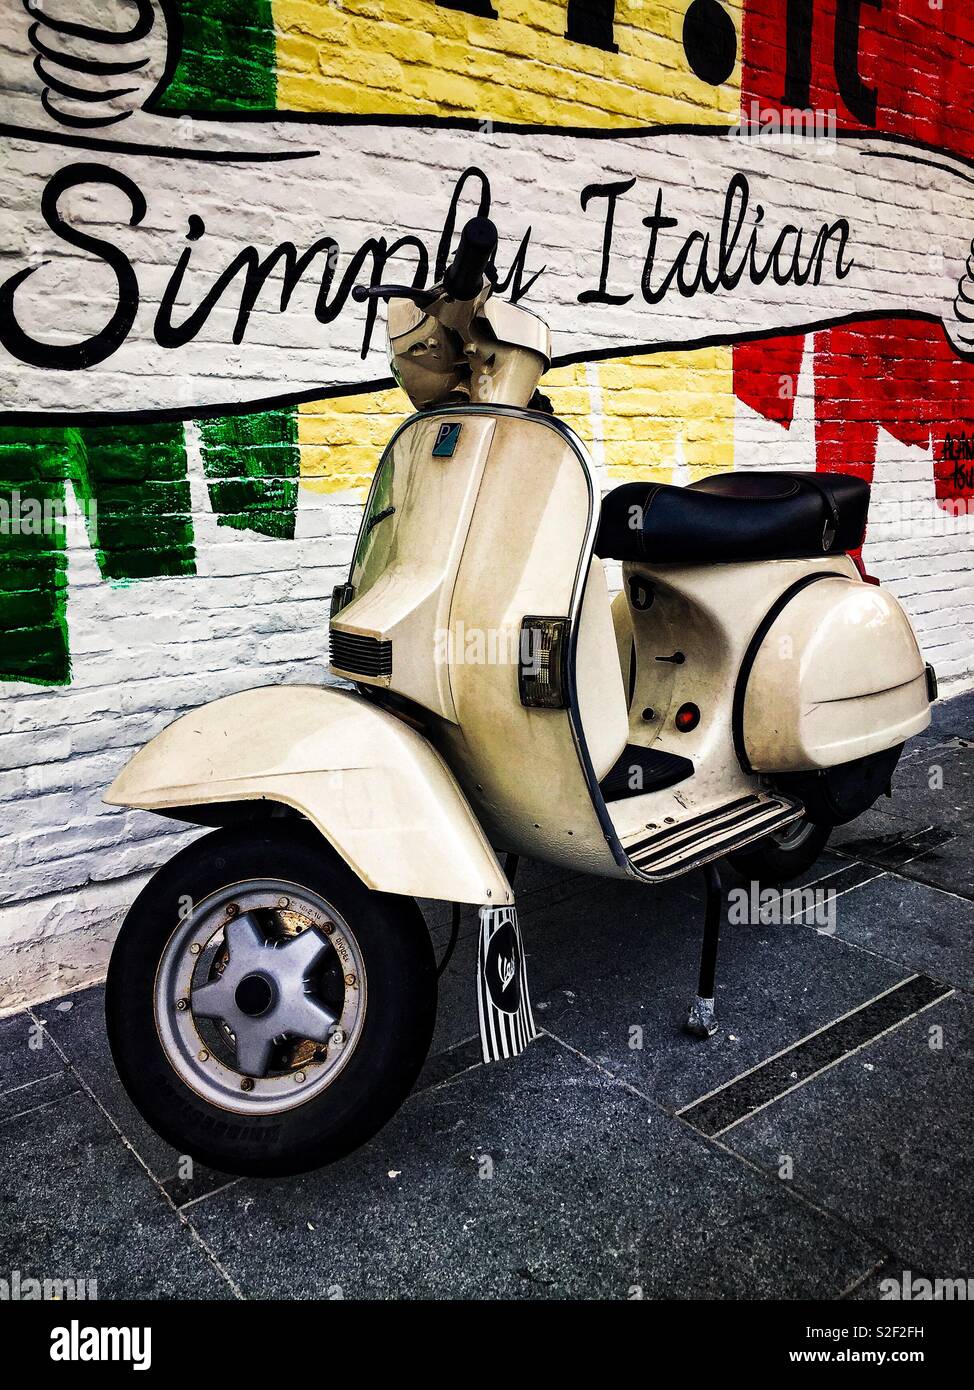 Vespa PX motor scooter with a mural celebrating its Italian heritage Stock  Photo - Alamy